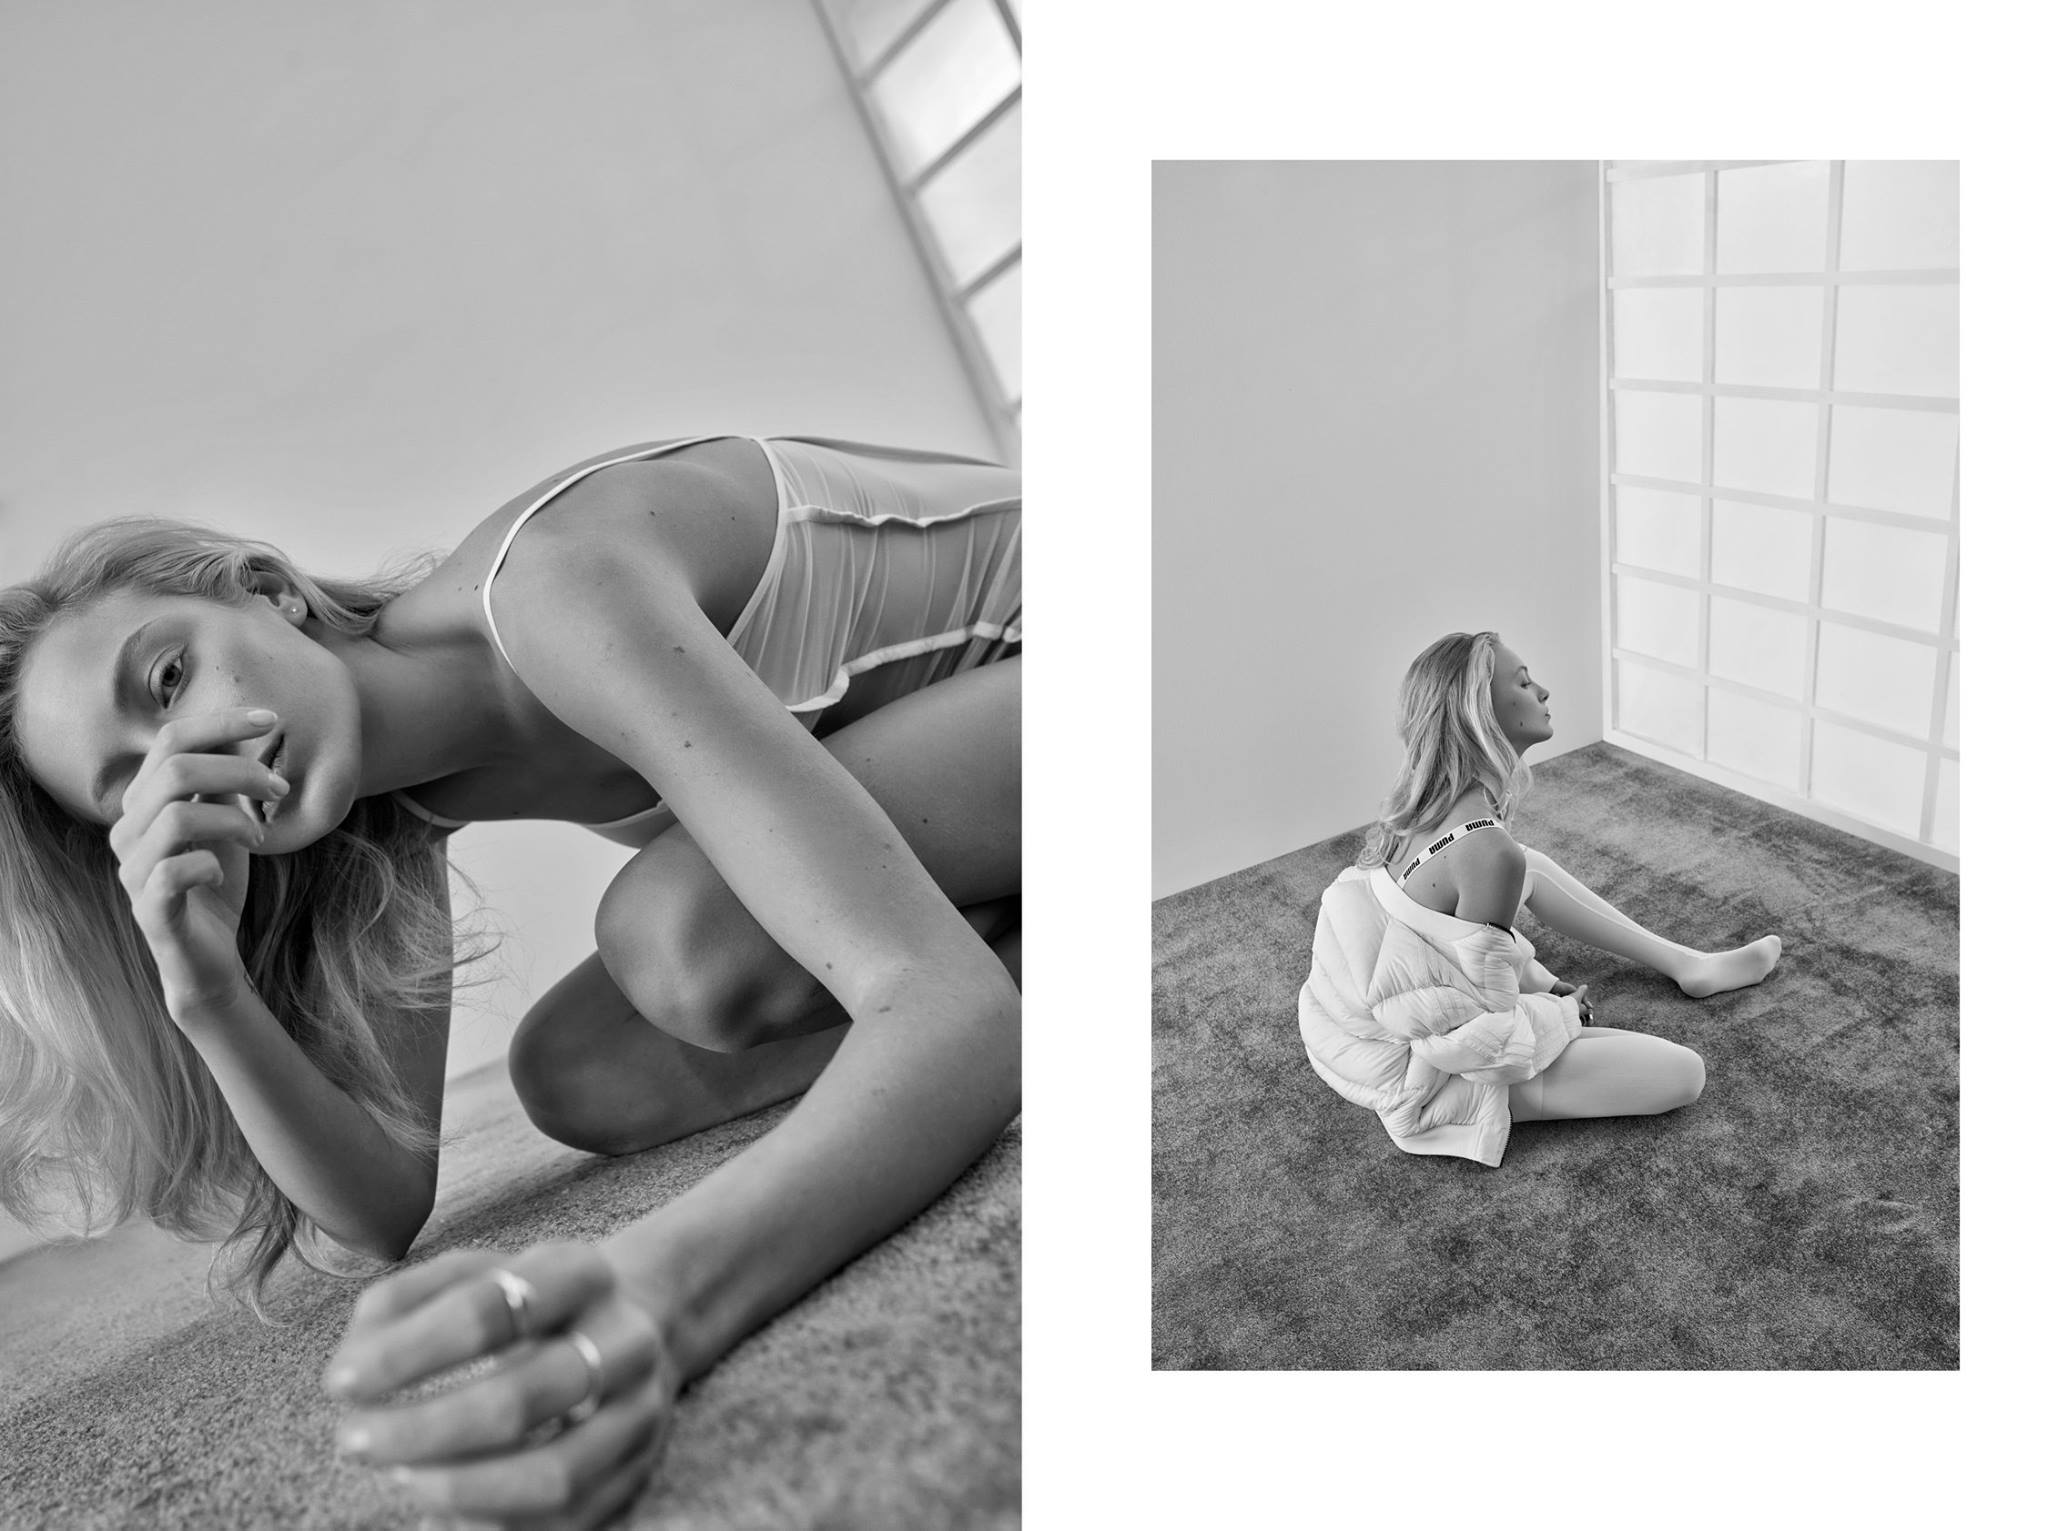 EDITORIAL: WHITE TEST STYLED BY KAS KRYST